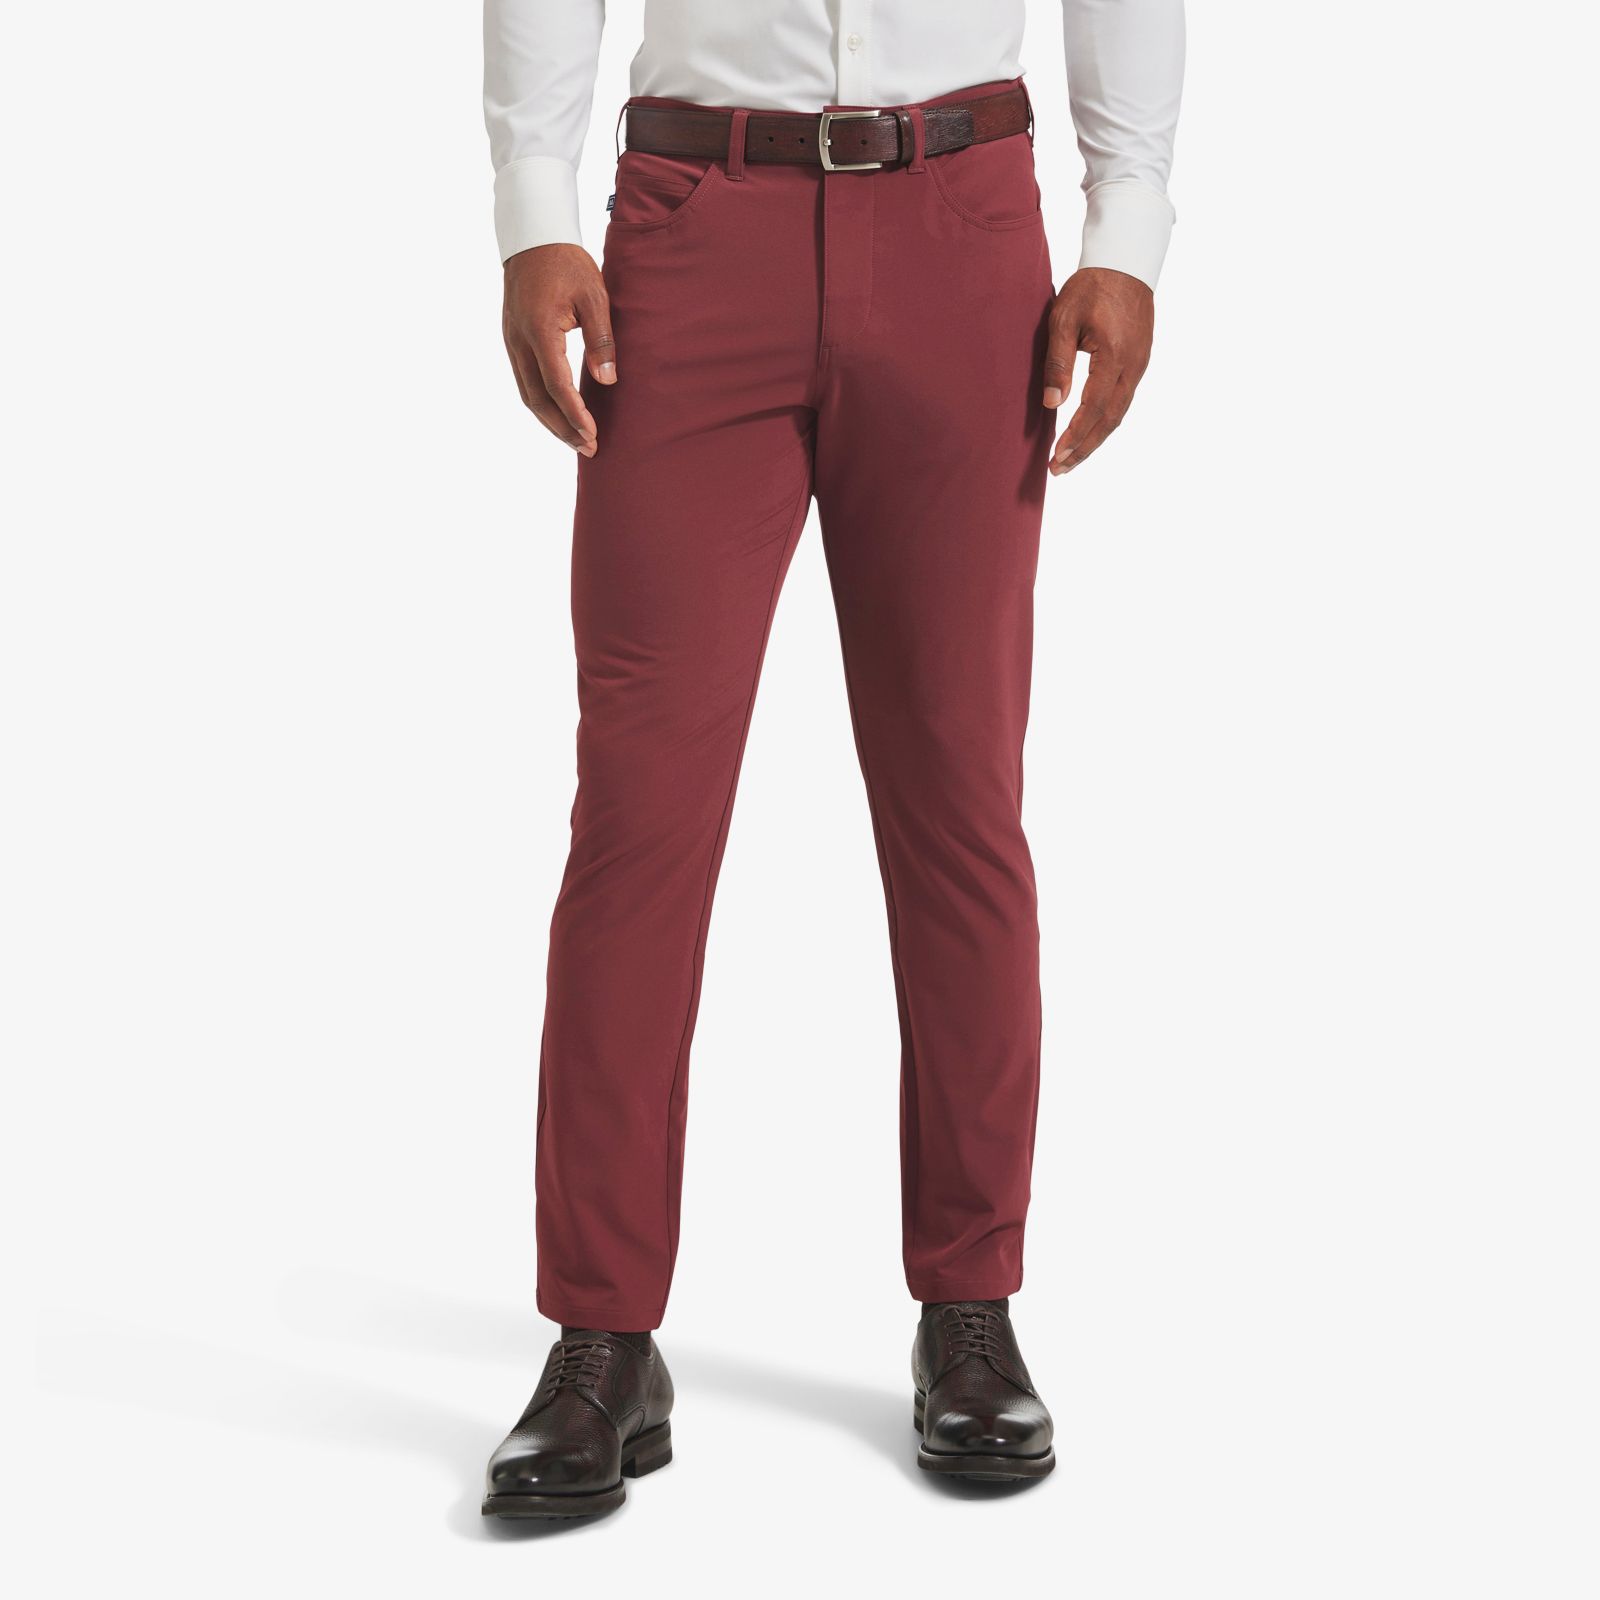 Buy Burgundy Cotton Solid Straight Pants Online in India